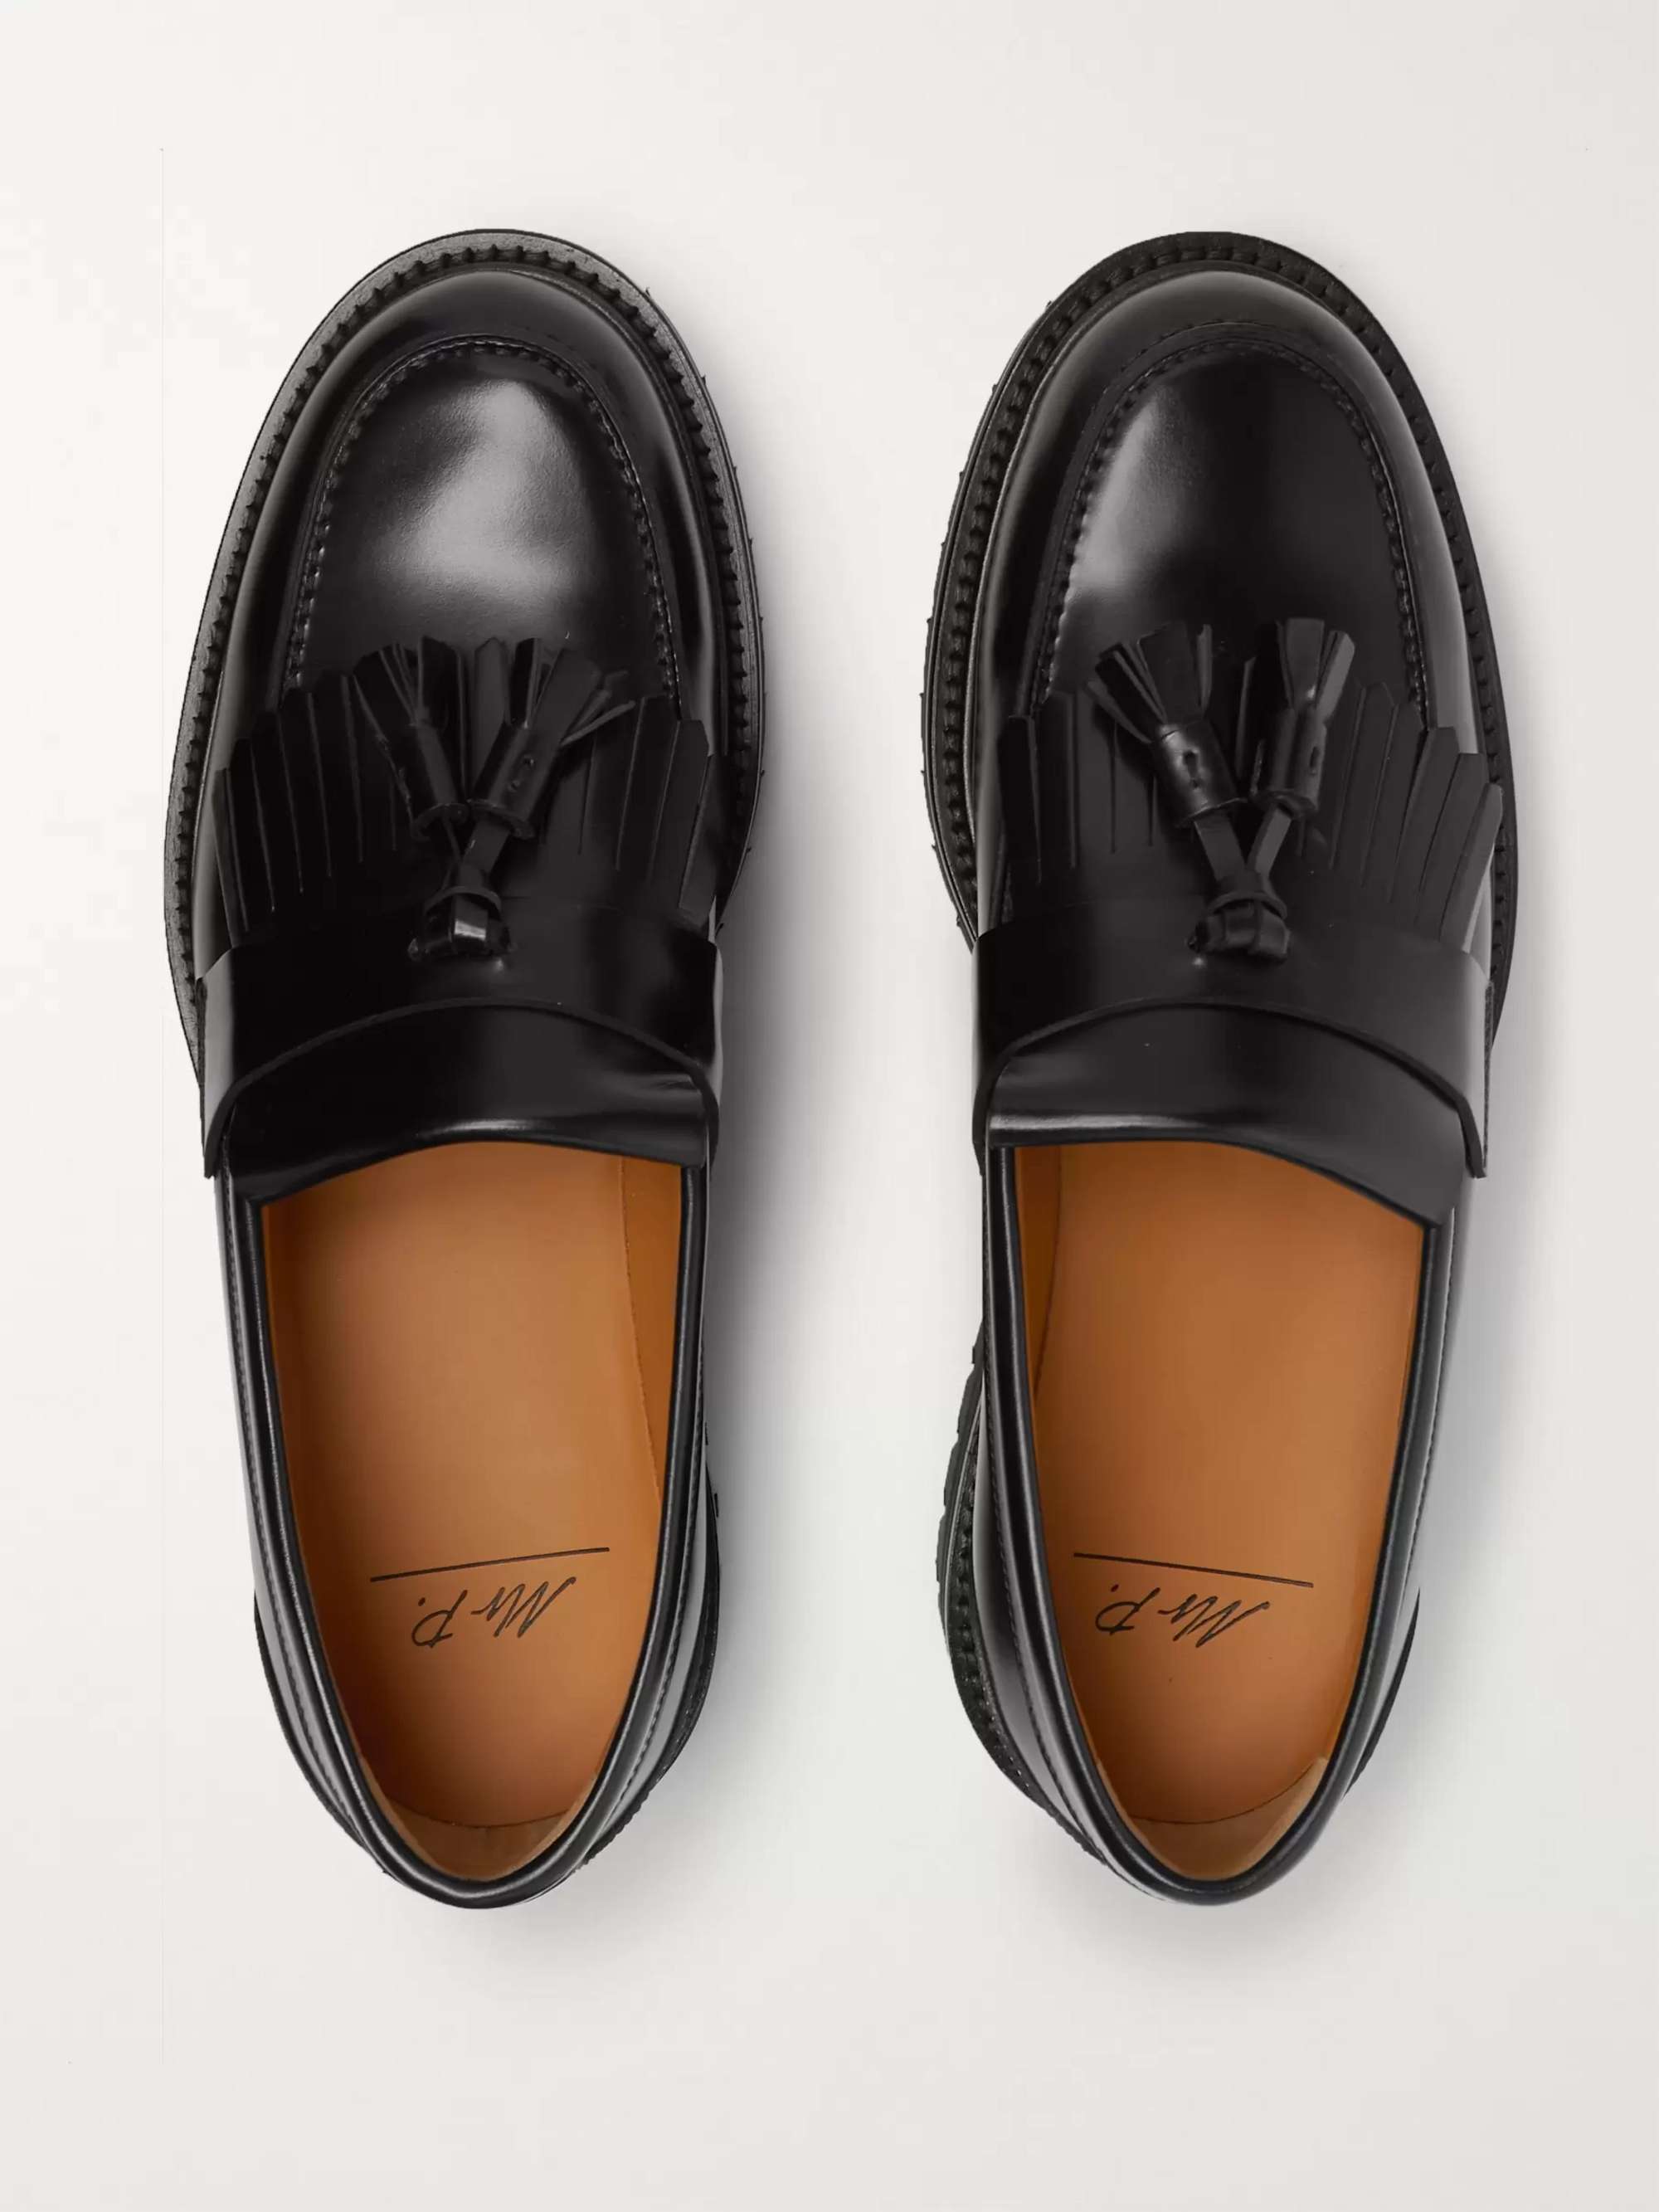 MR P. Jacques Fringed Leather Loafers